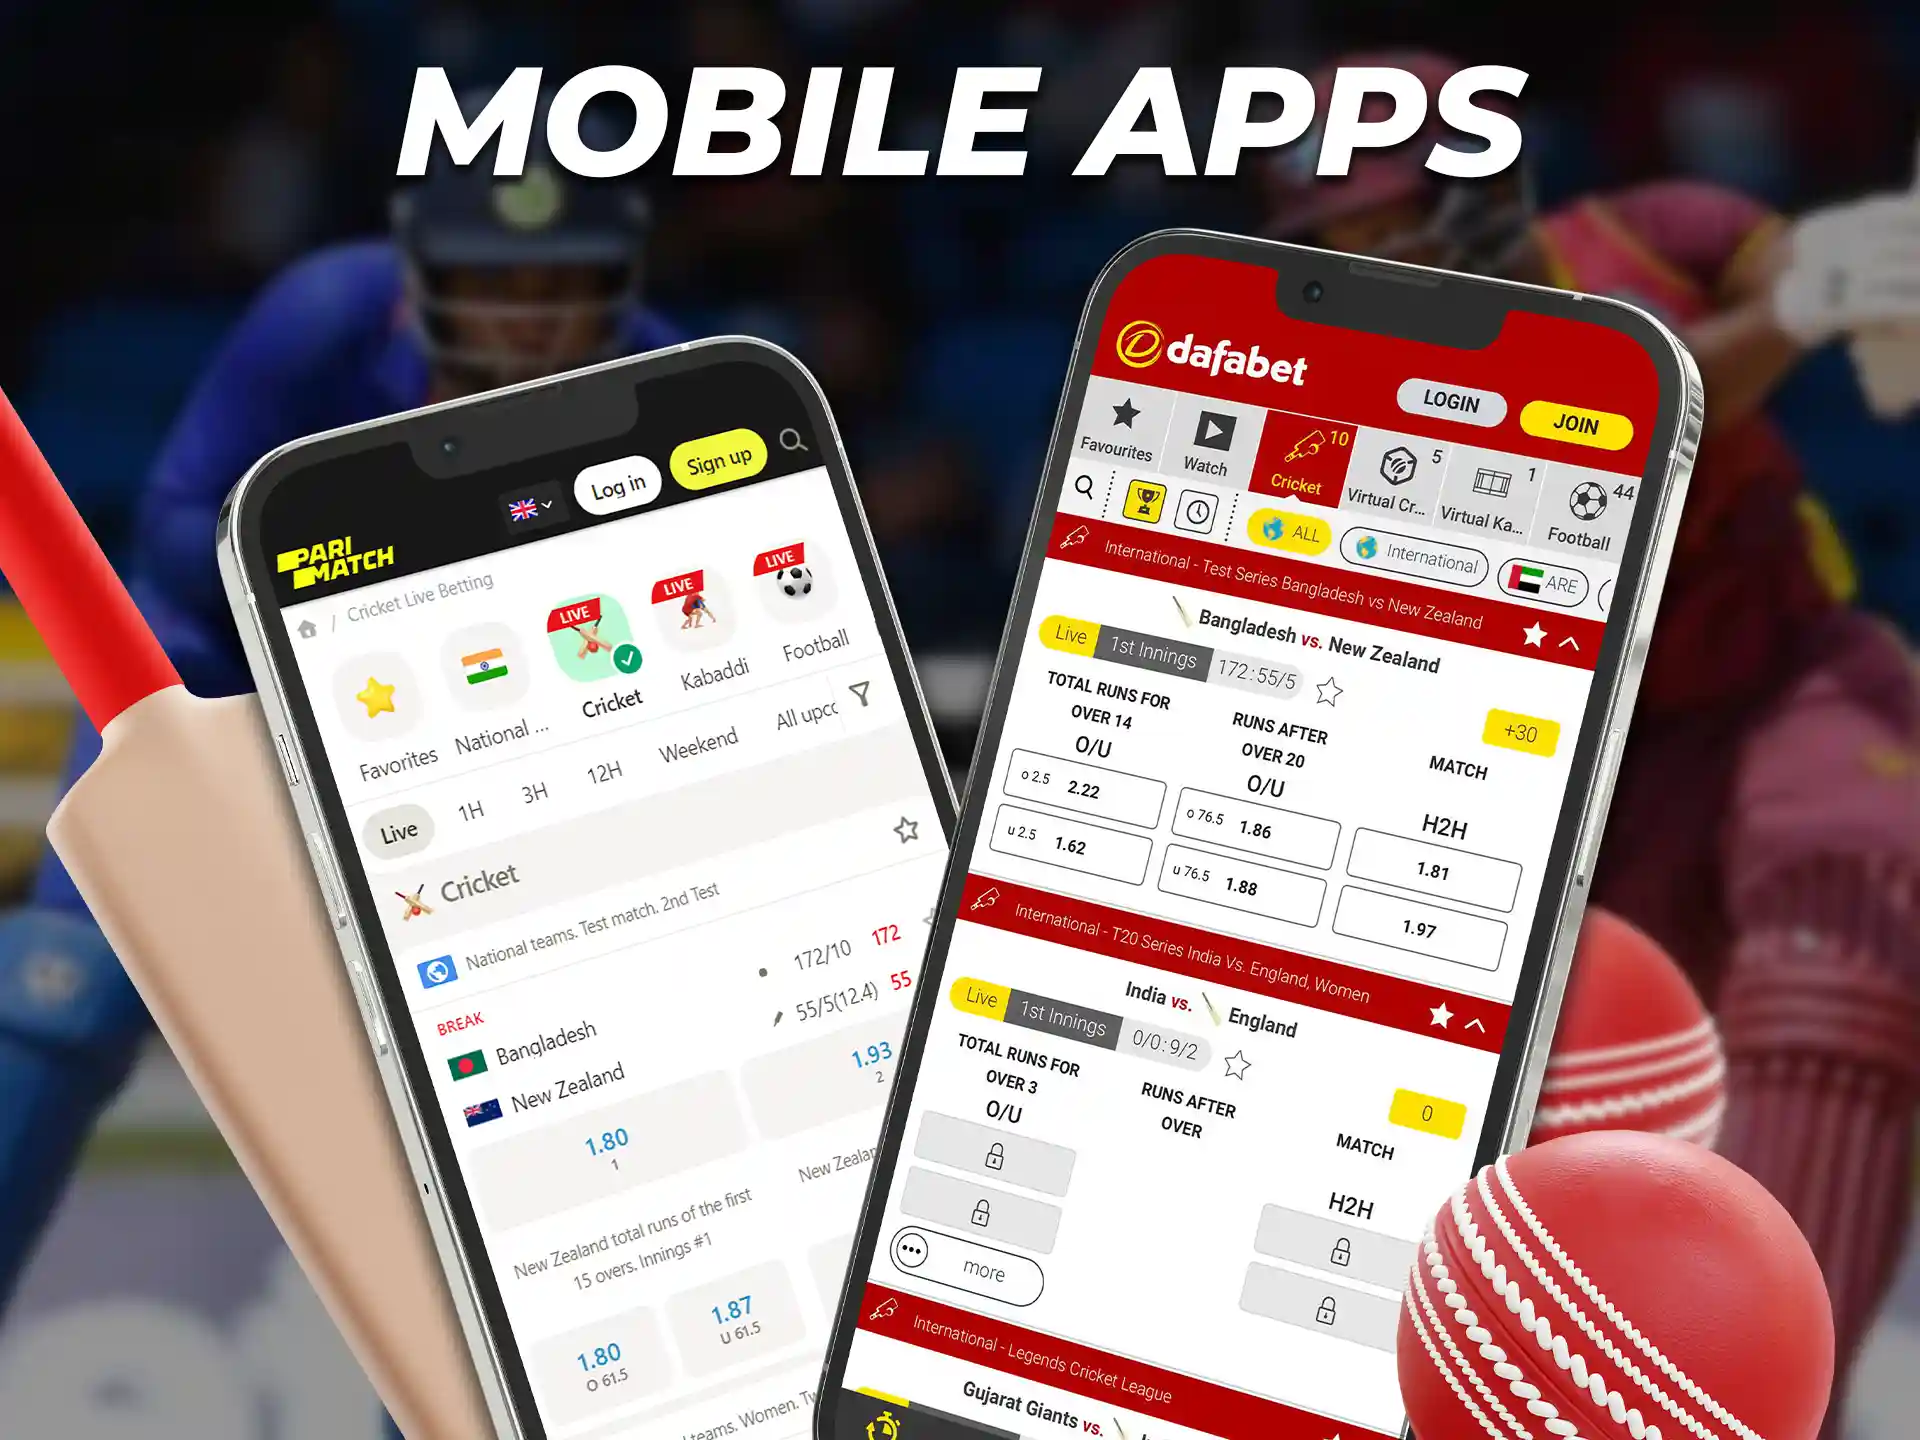 Parimatch and Dafabet mobile apps are some of the best in the sports betting market.